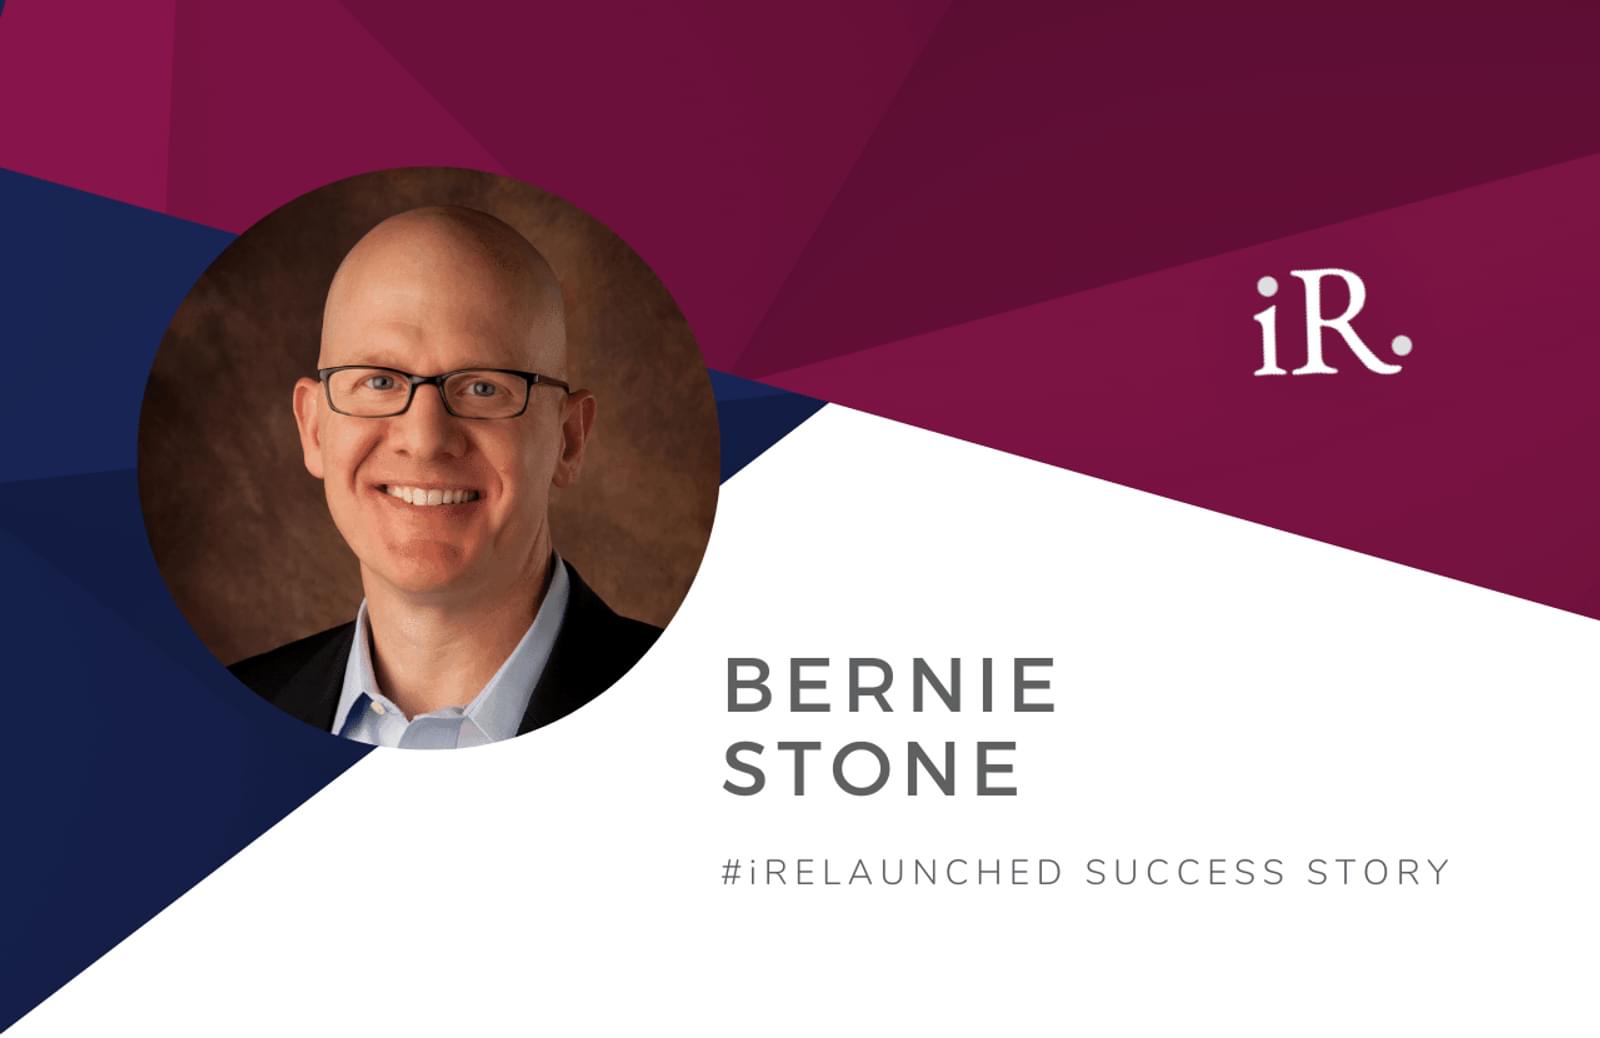 Bernie Stone's headshot and the text #iRelaunched Success Story along with the iRelaunch logo.  A navy and maroon geometric textured background intersect behind Bernie's headshot.